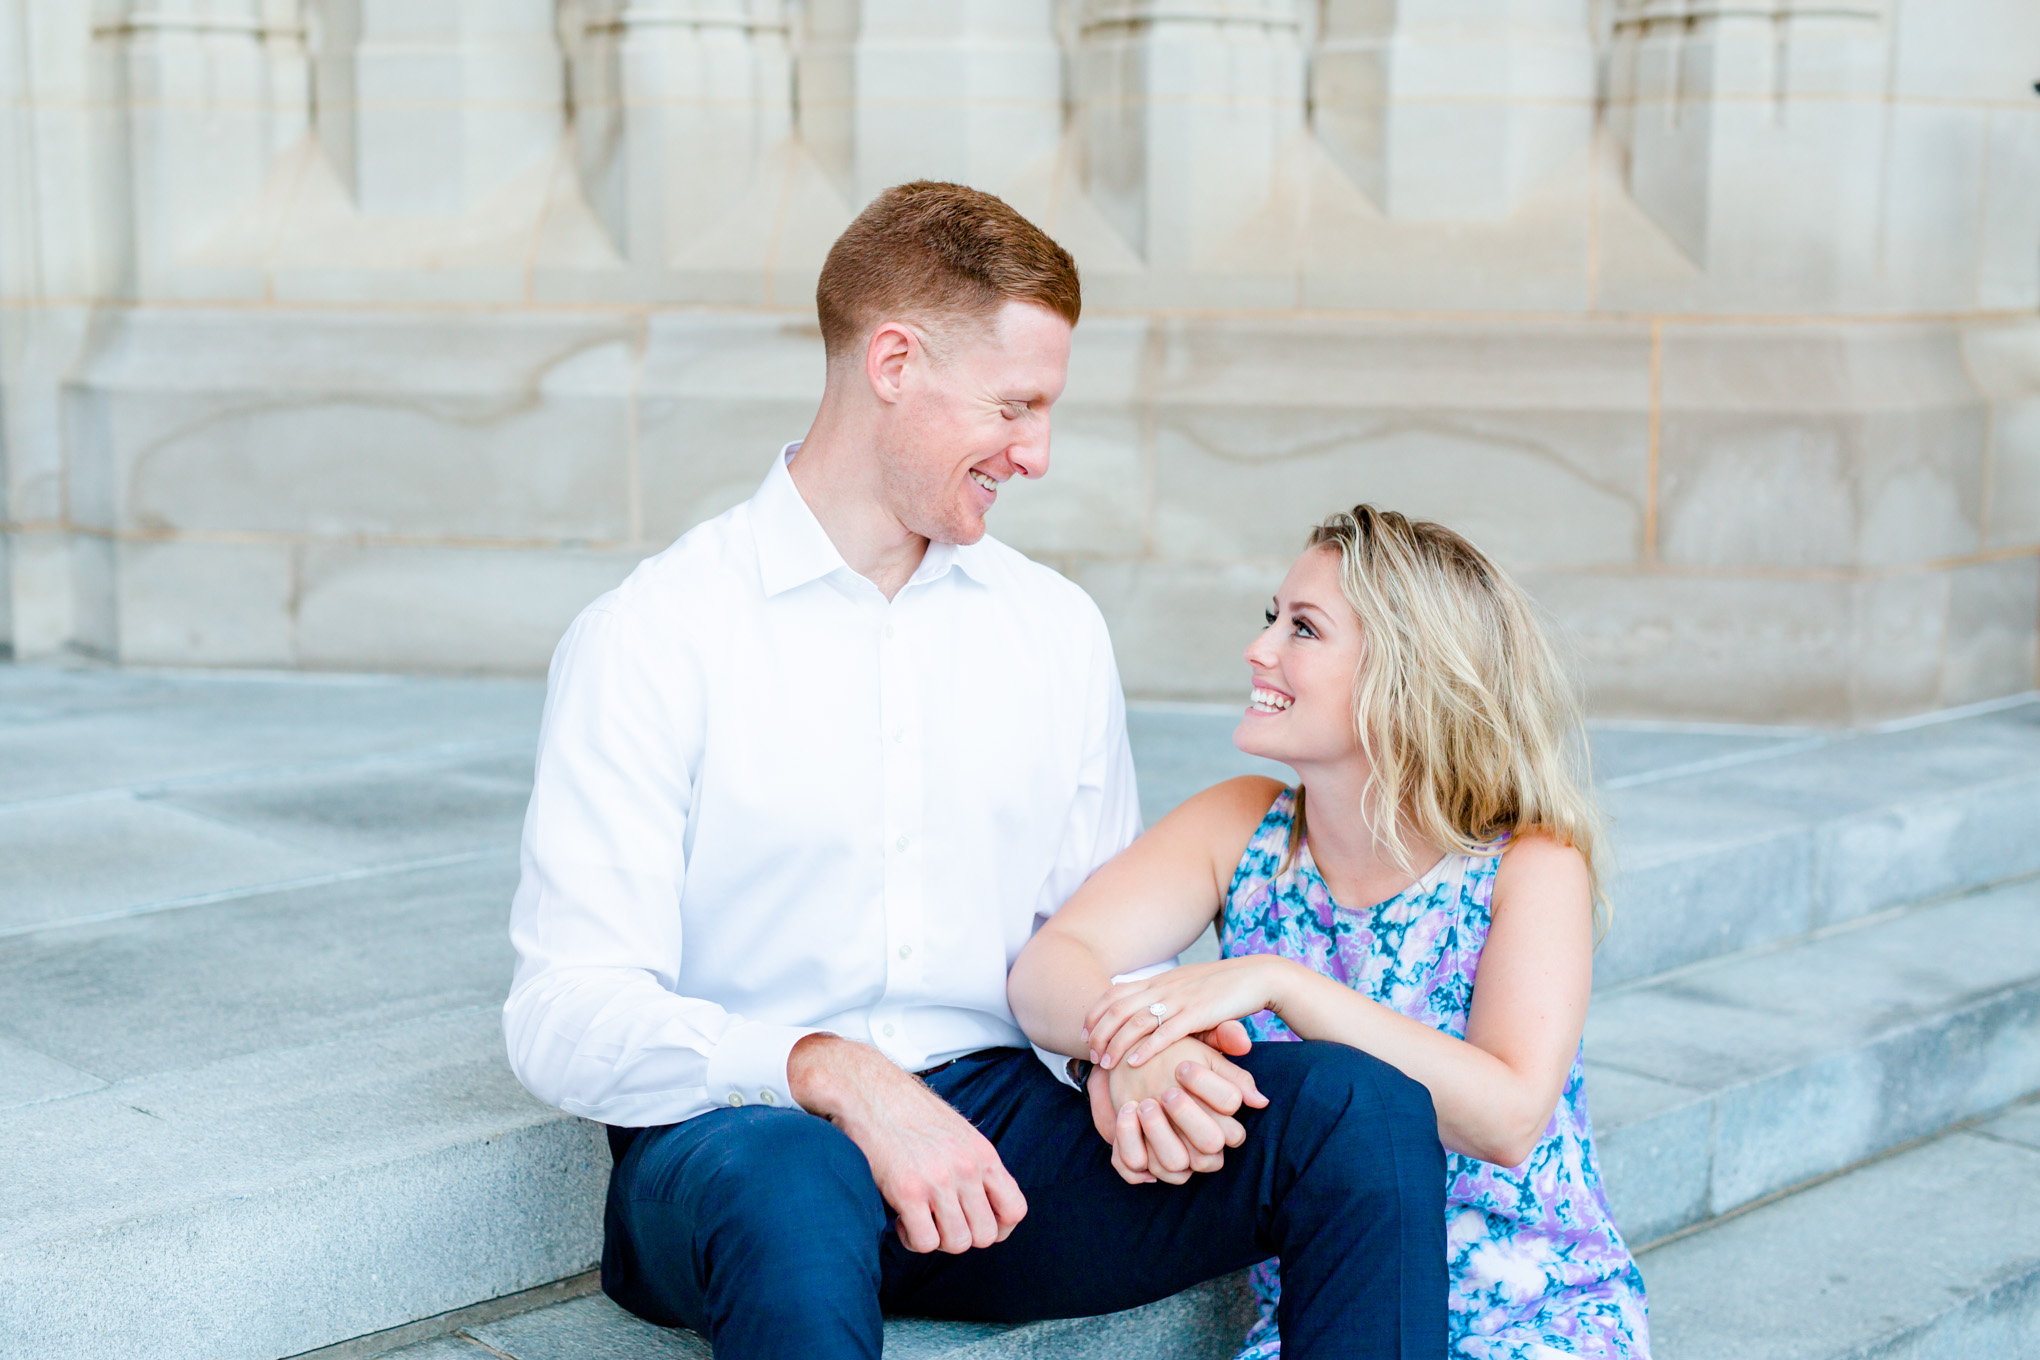 National Cathedral engagement photos, National Cathedral, D.C. engagement photos, classic engagement portraits, Washington National Cathedral, natural light engagement photos, D.C. engagement photographer, Rachel E.H. Photography, sunrise engagement photos, couple sitting on stairs